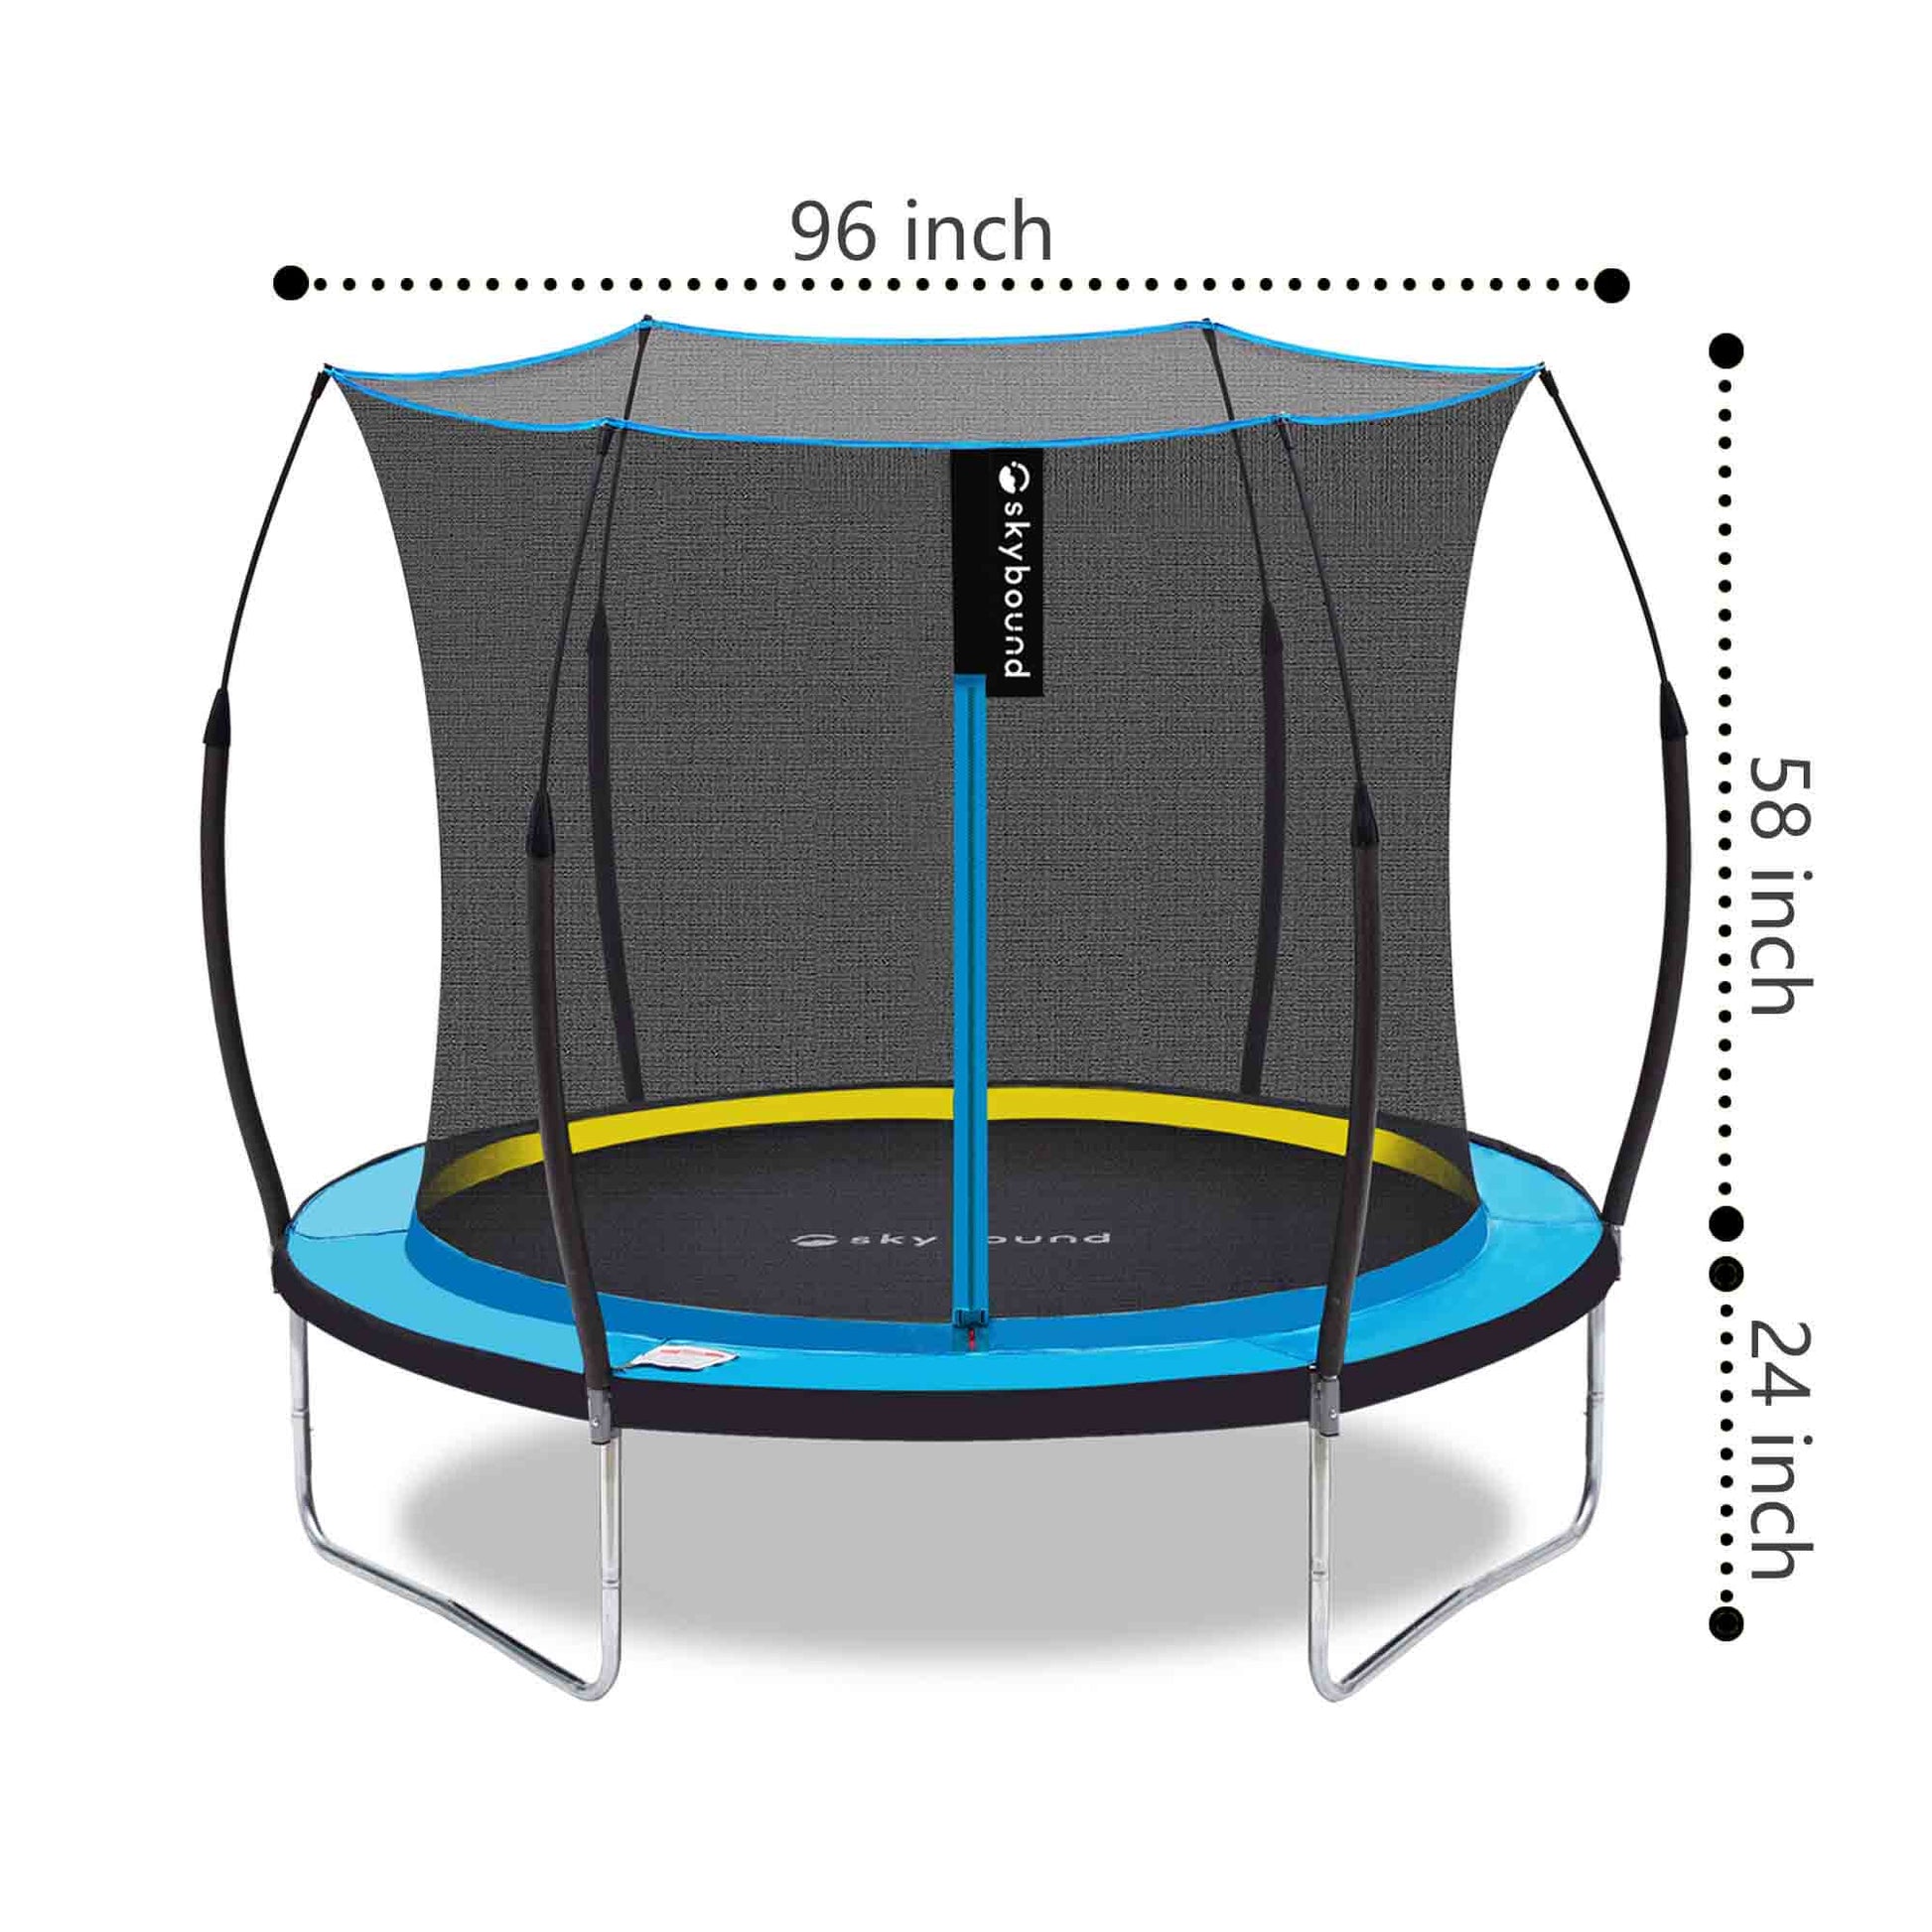 8ft trampoline size: 96inch × 82inch